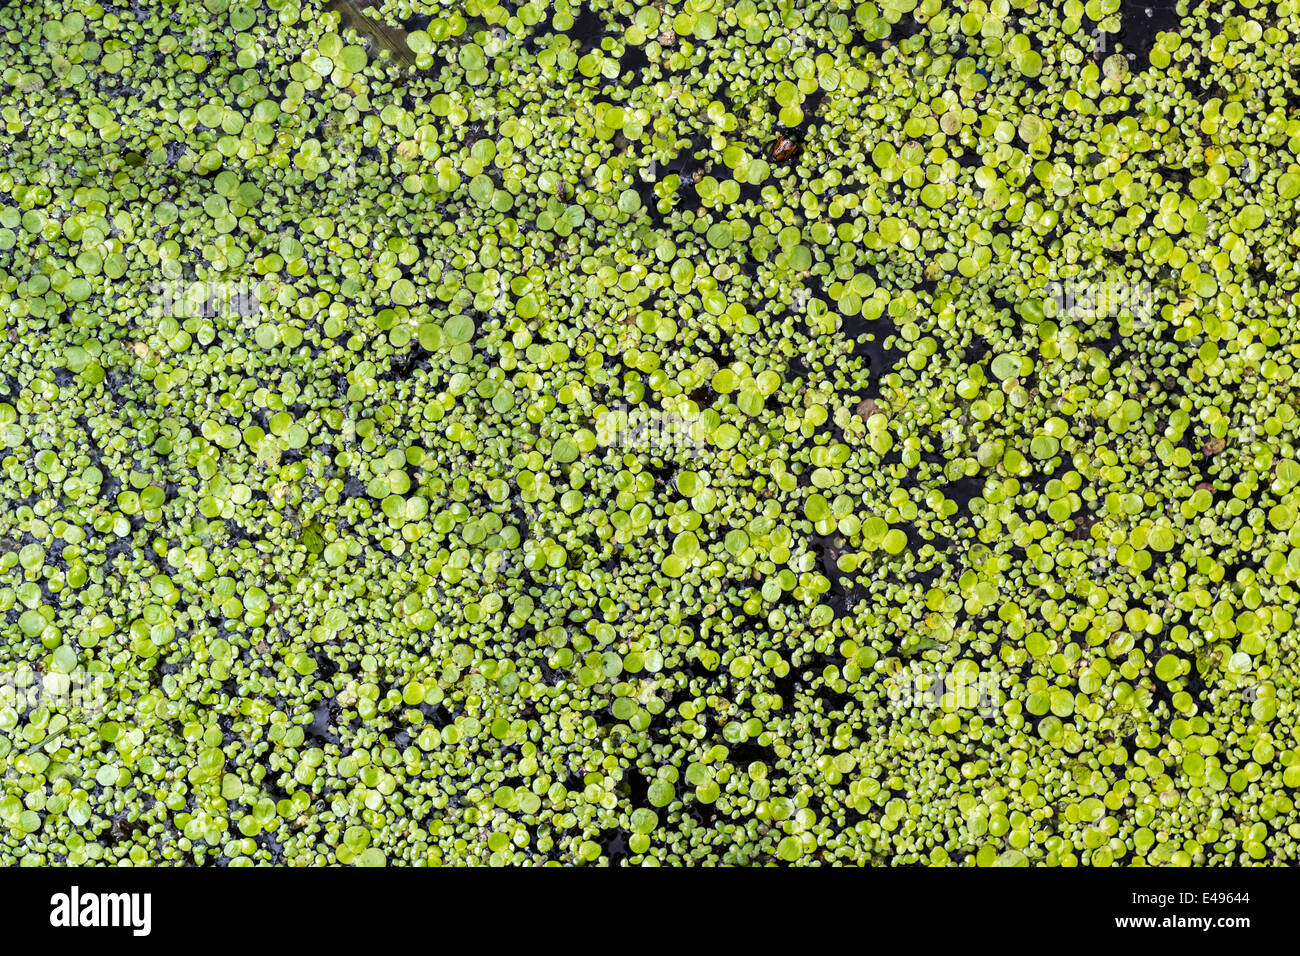 Duckweed forms an abstract pattern on a pond Stock Photo